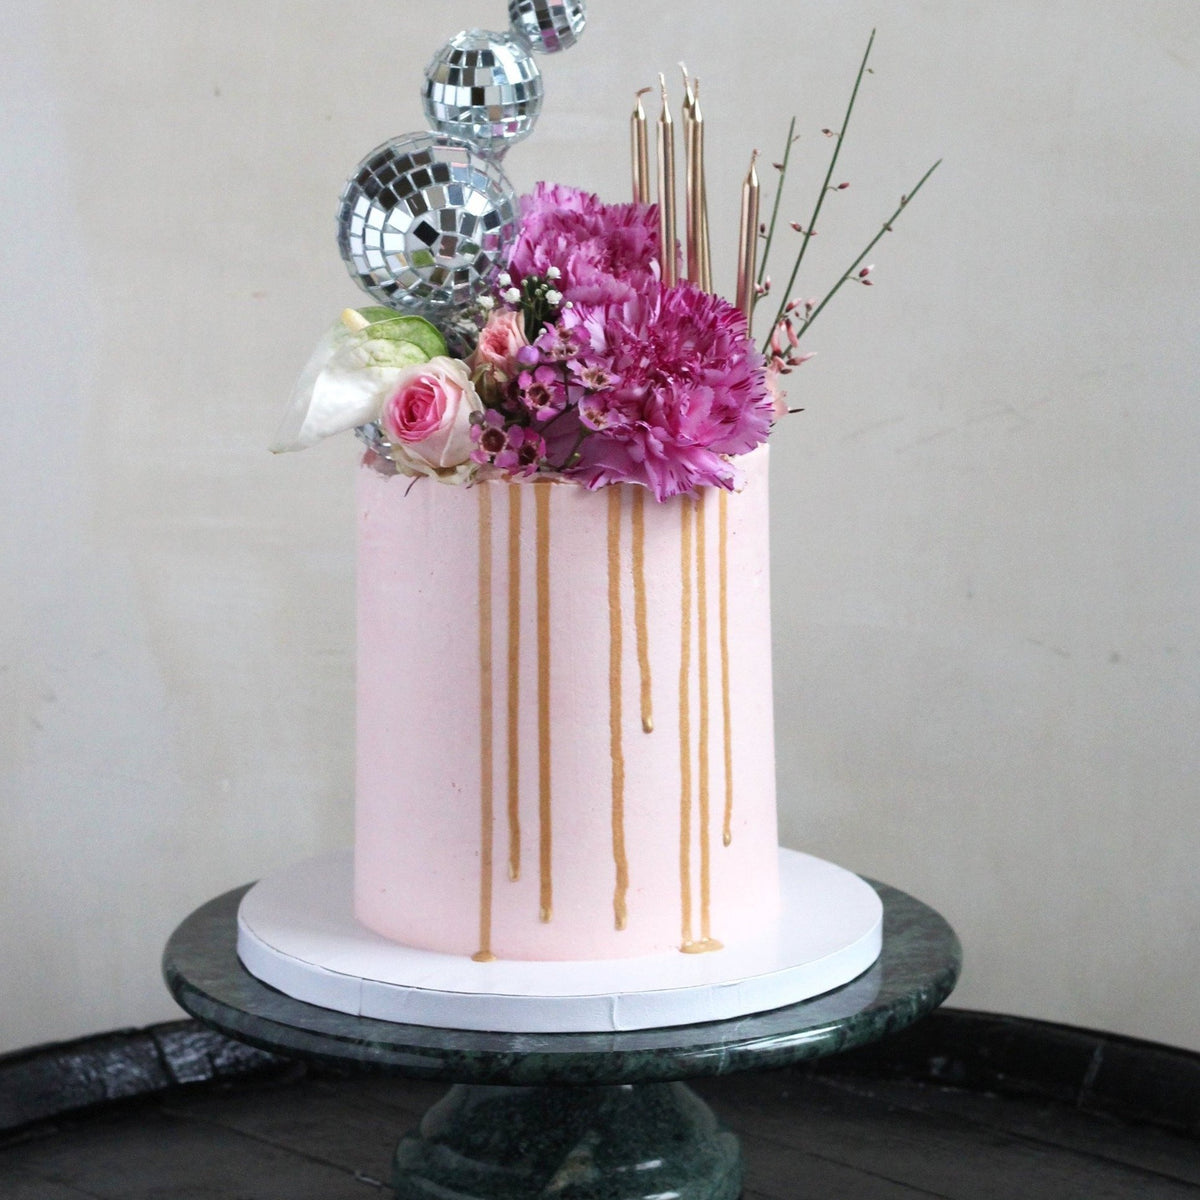 Golden Hour Cake for disco queens with pink icing, bold florals, gold drip and of course the disco balls!